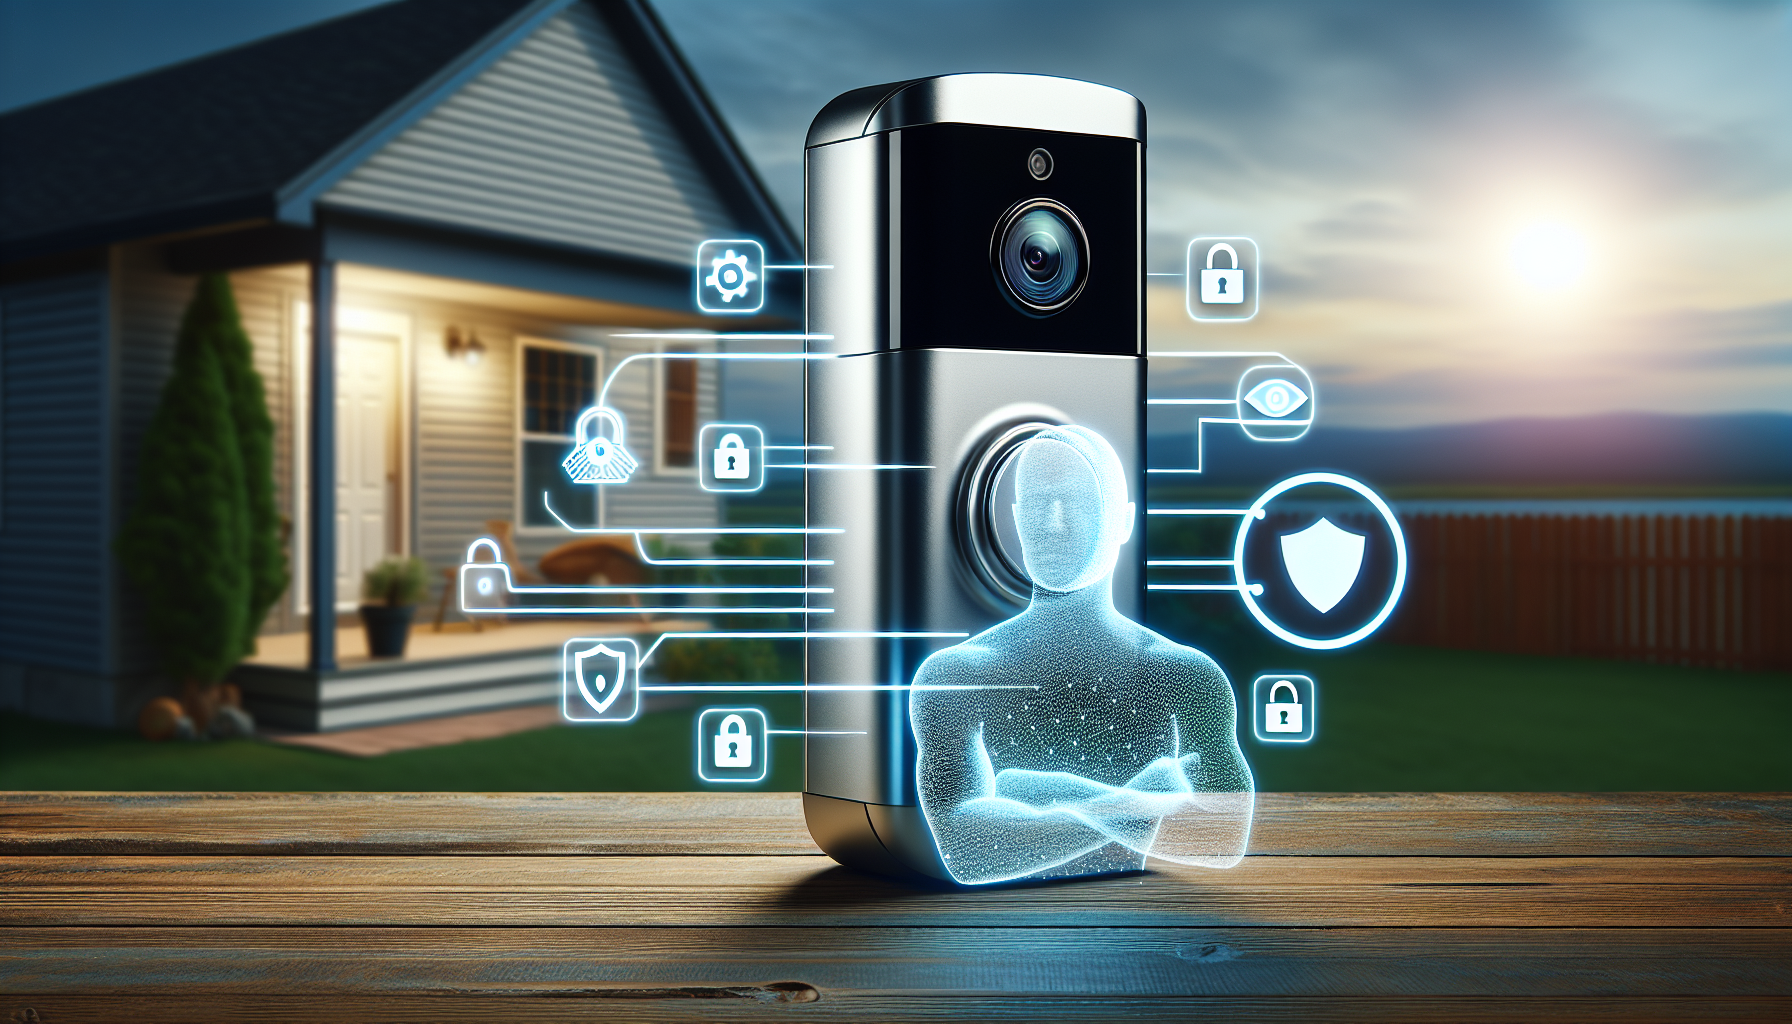 The maker of budget-friendly doorbell cameras has addressed security vulnerabilities, thereby improving user privacy safeguards against possible surveillance.